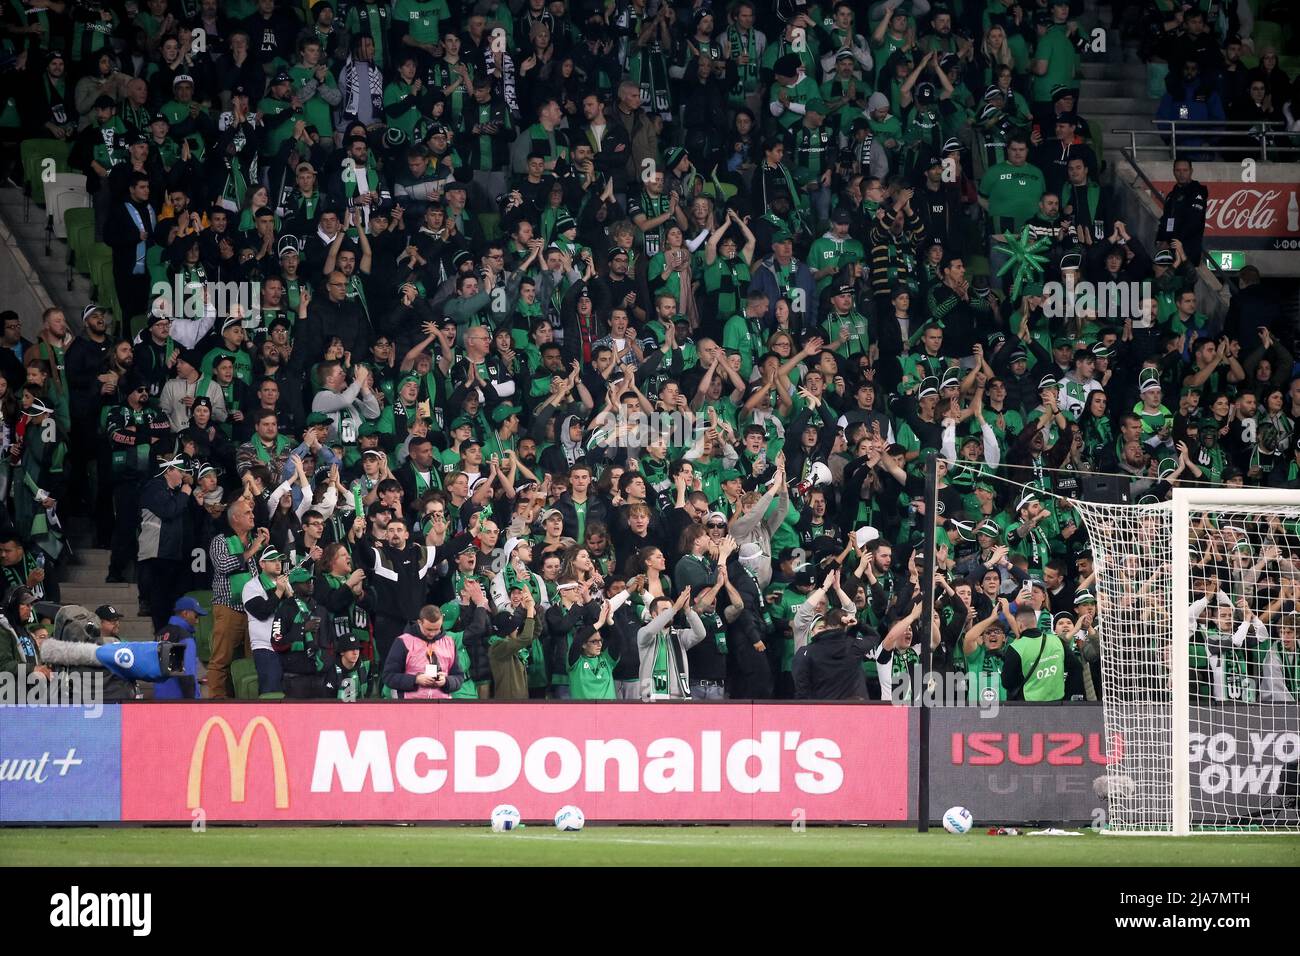 Melbourne, Australia, 28 May, 2022. Western United fans during the A-League Grand Final soccer match between Melbourne City FC and Western United at AAMI Park on May 28, 2022 in Melbourne, Australia. Credit: Dave Hewison/Speed Media/Alamy Live News Stock Photo